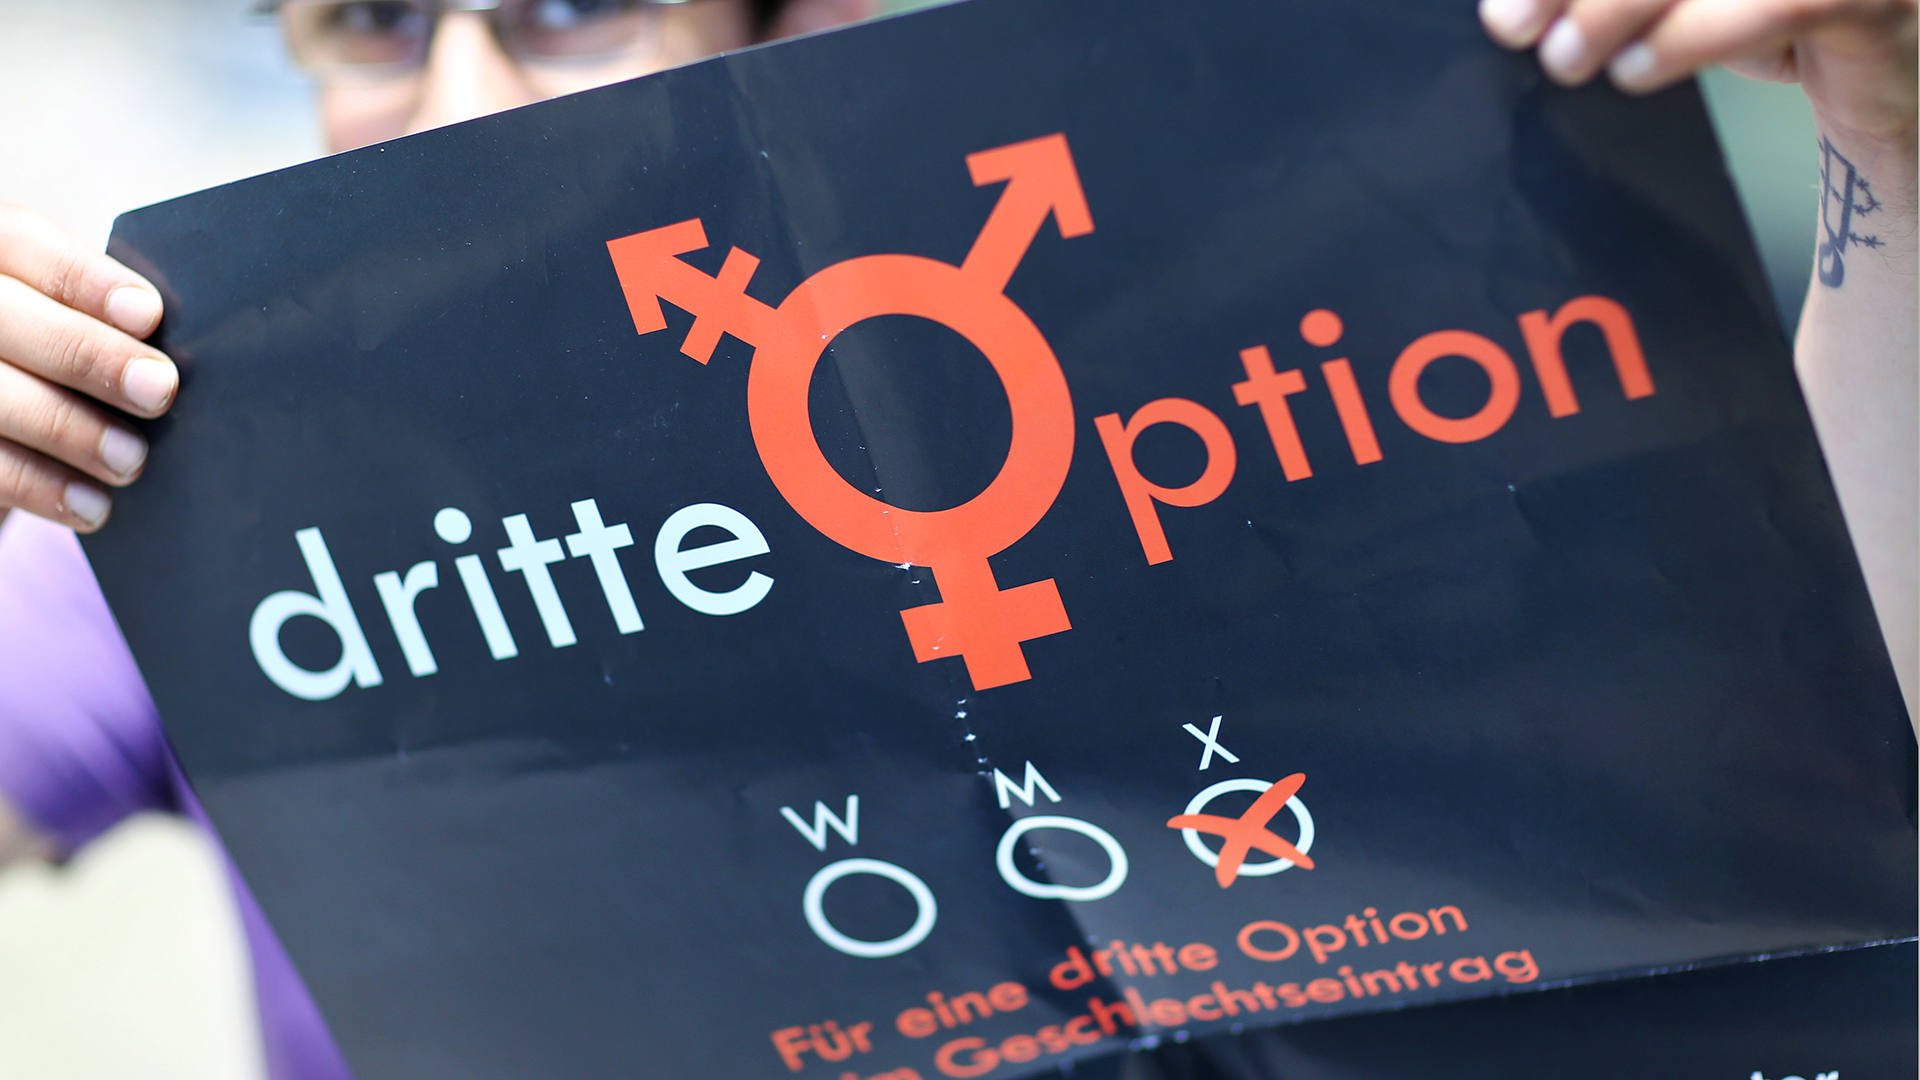 Kampagne "Dritte Option" | picture alliance / dpa